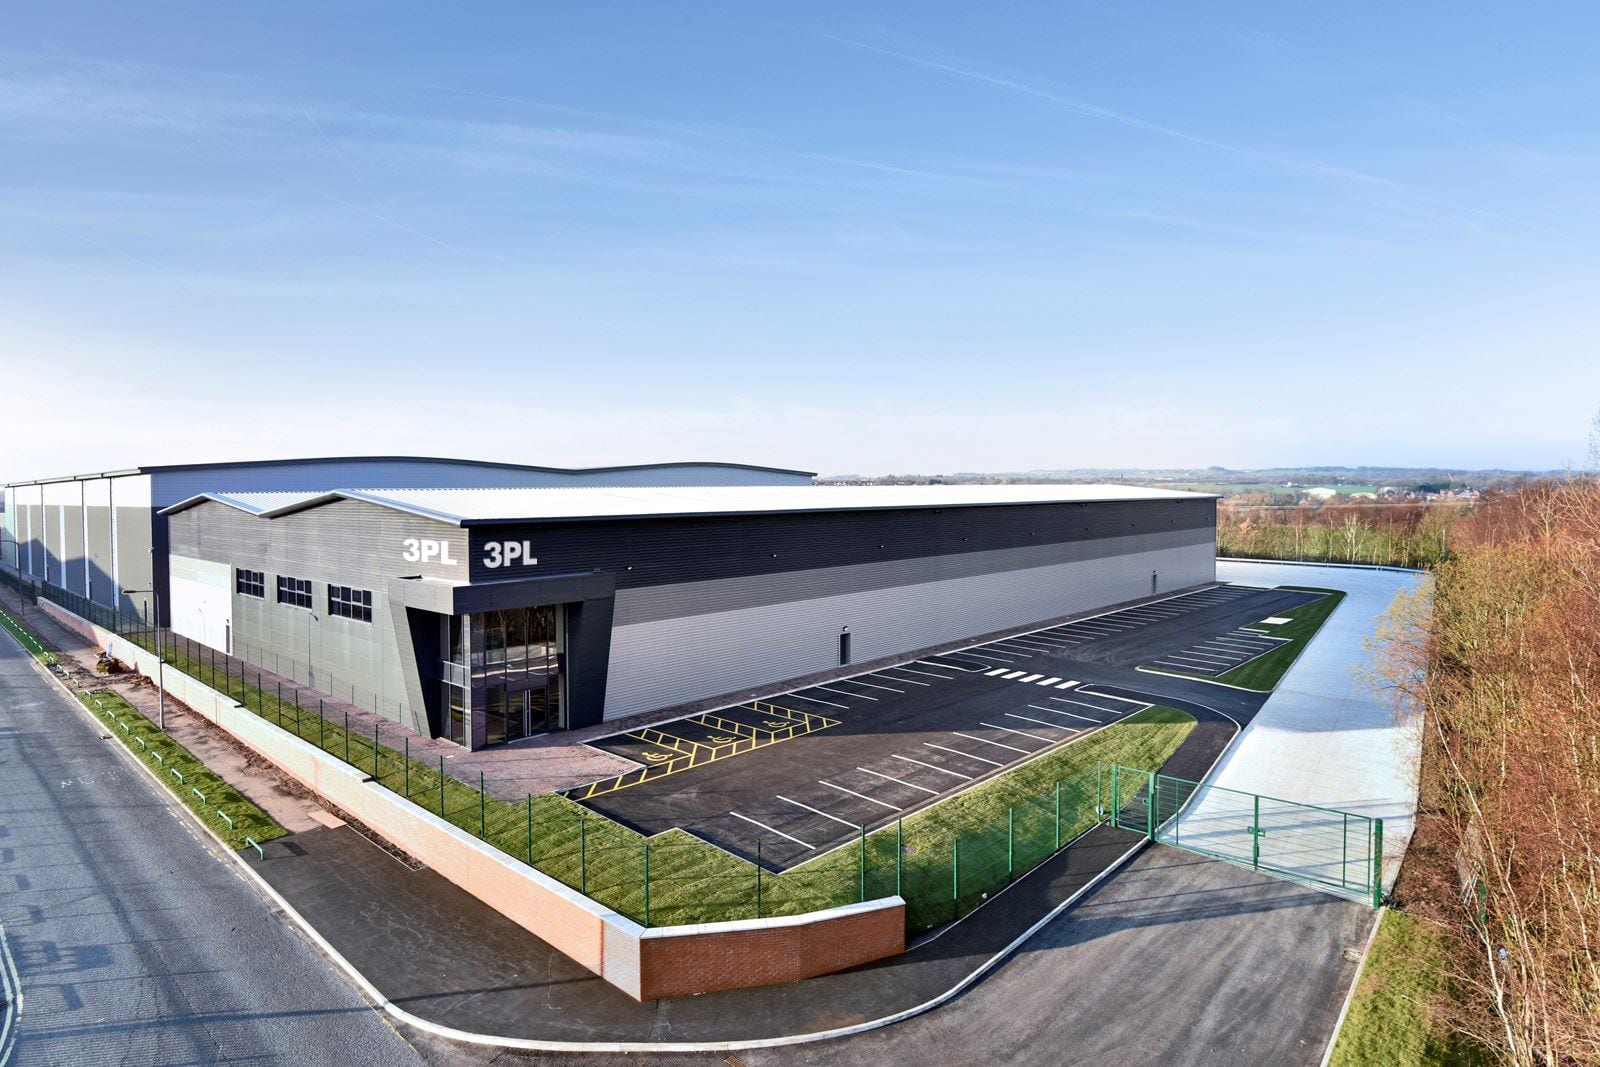 3PL unveils new Retail Distribution Centre in the North West